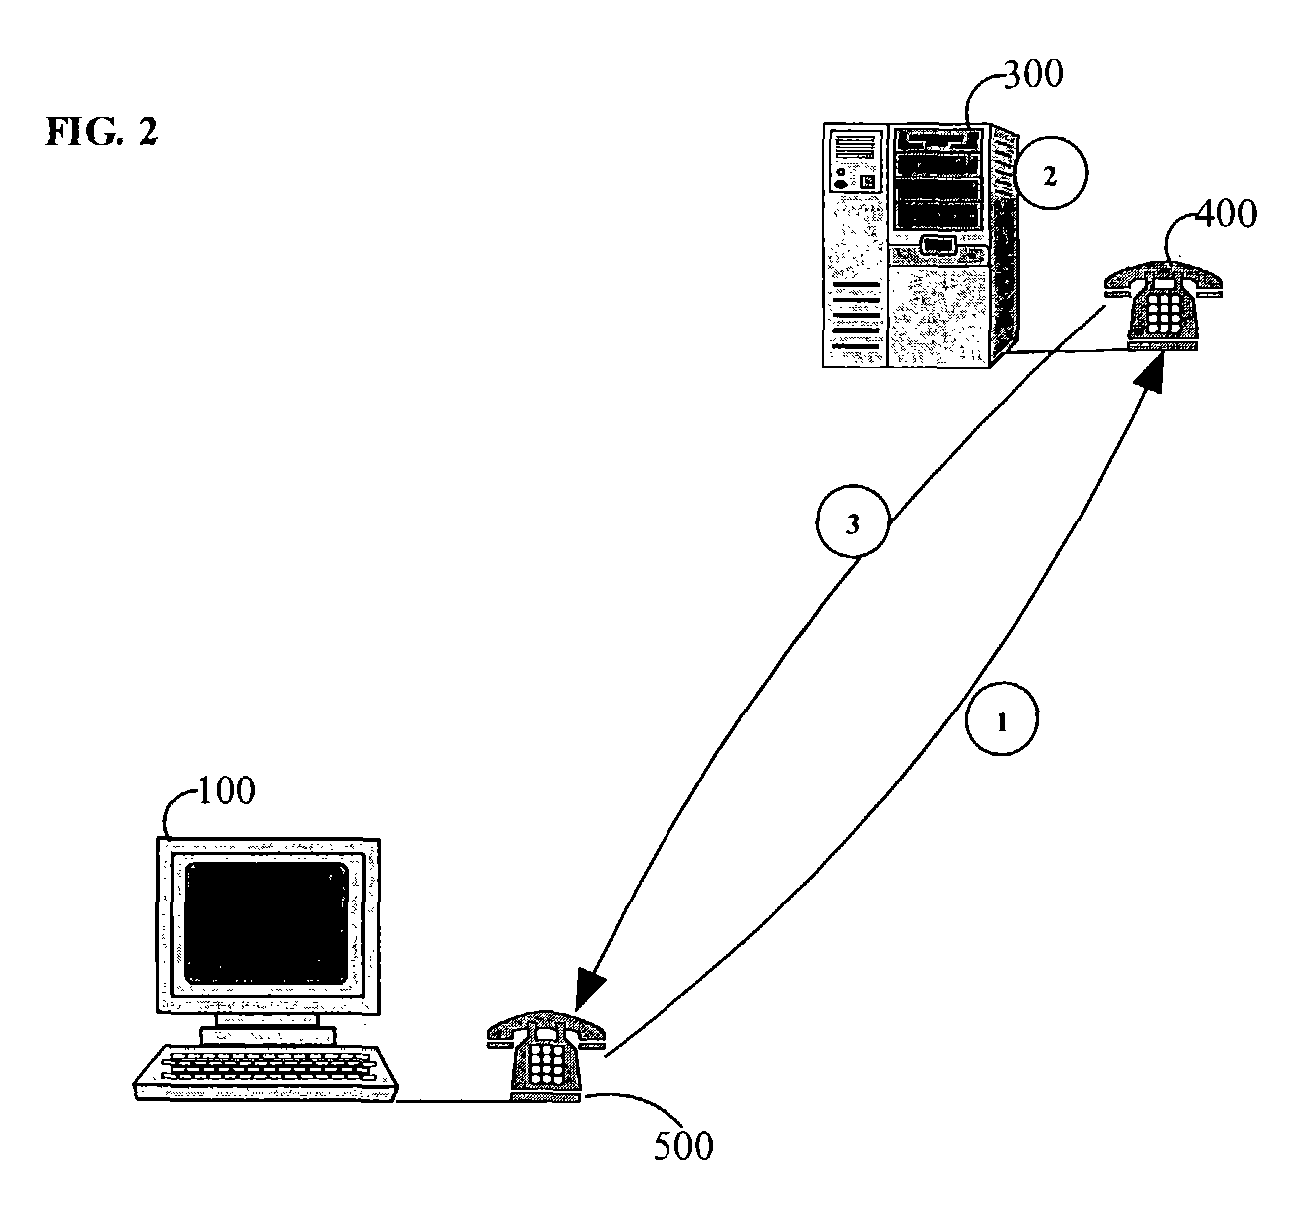 Method and device for determining the physical location and identity of a user